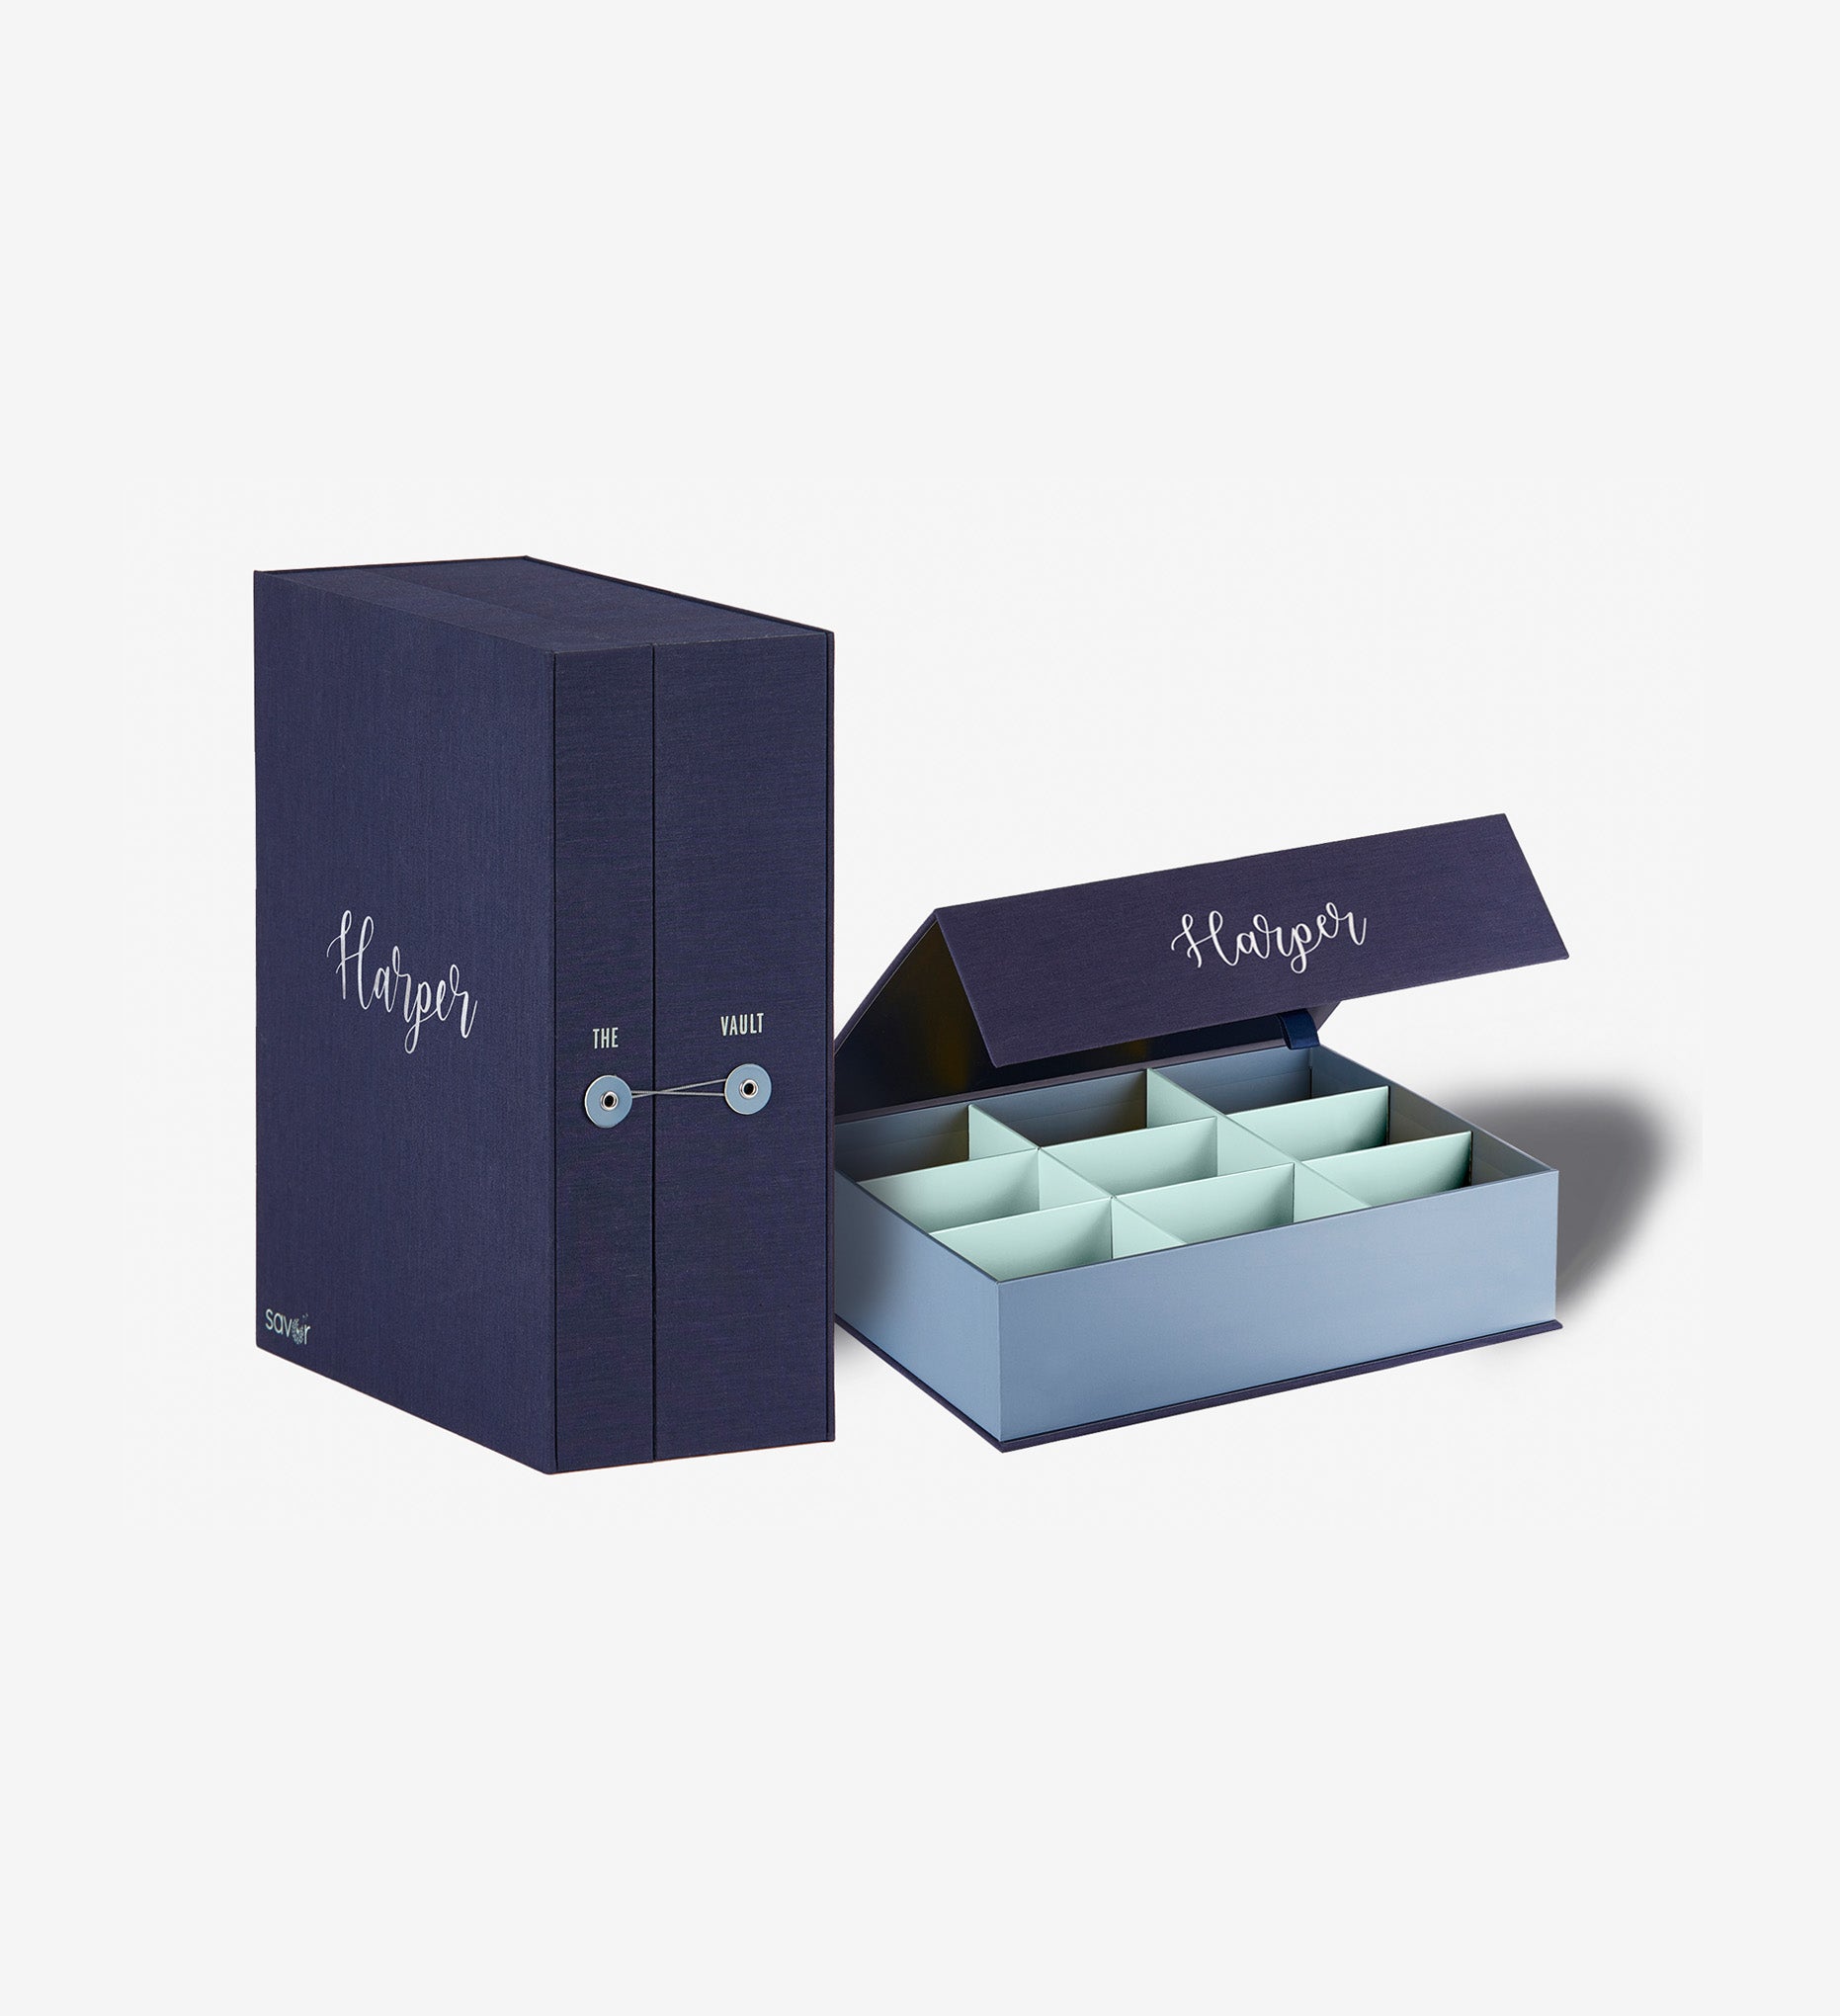 Savor Combo closed Vault keepsake box and overflow box in something blue, both boxes read 'Harper' in a cursive font